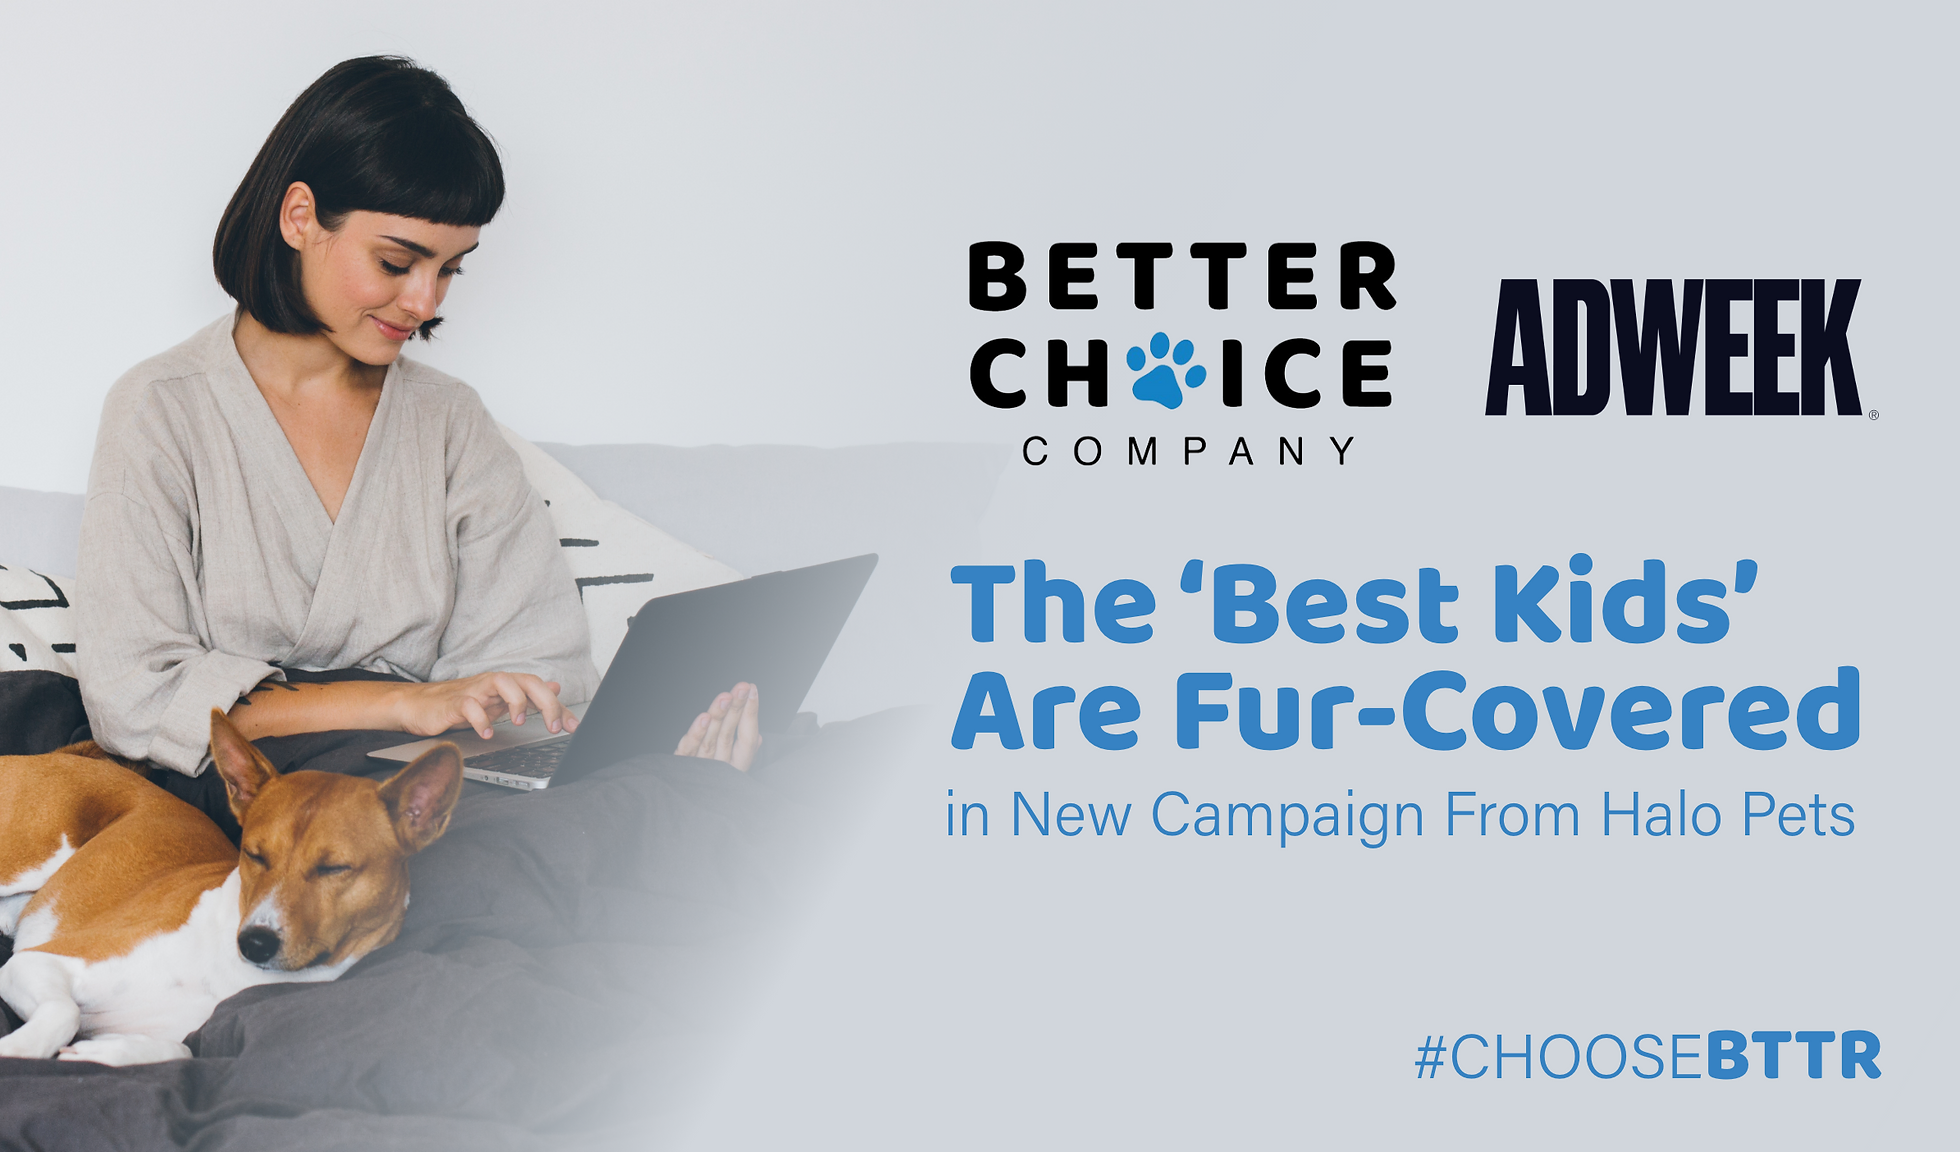 Halo Pets' new campaign "The Best Kids Are Fur-Covered" featured on AdWeek